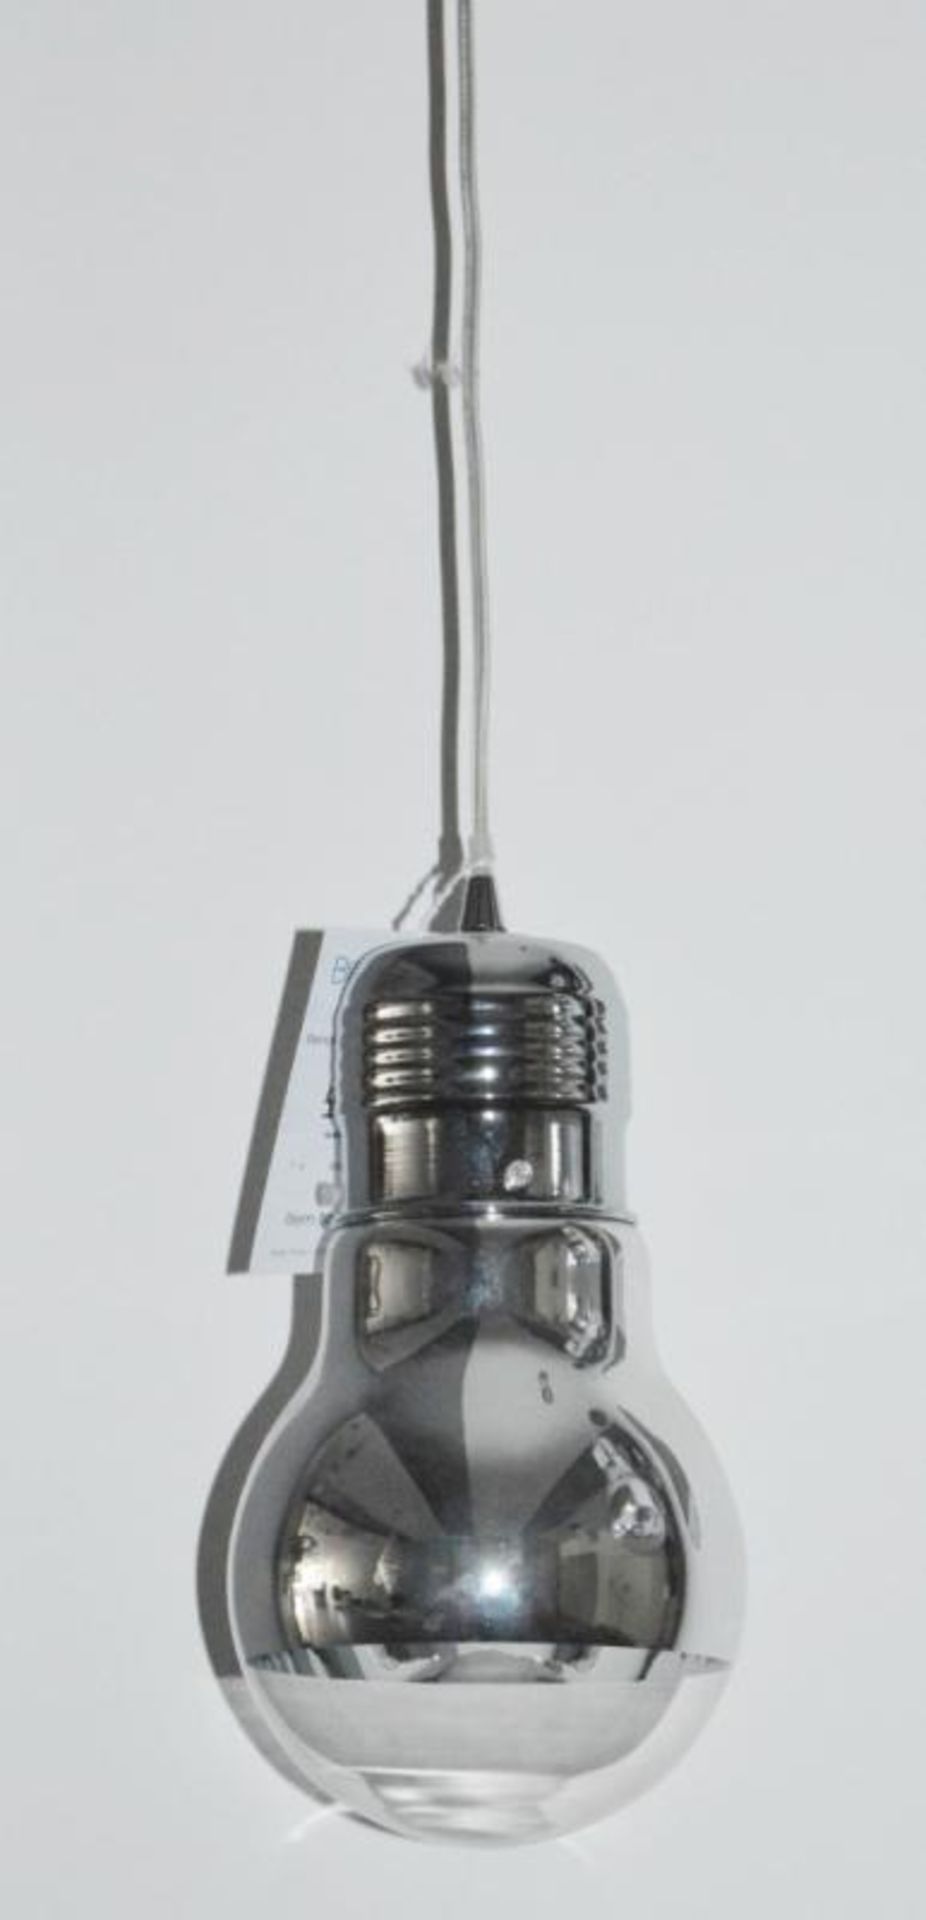 1 x Neo Chrome Large Bulb Pendant Light With Mirrored Clear Glass Shade - Adjustable Height - Quirky - Image 3 of 3